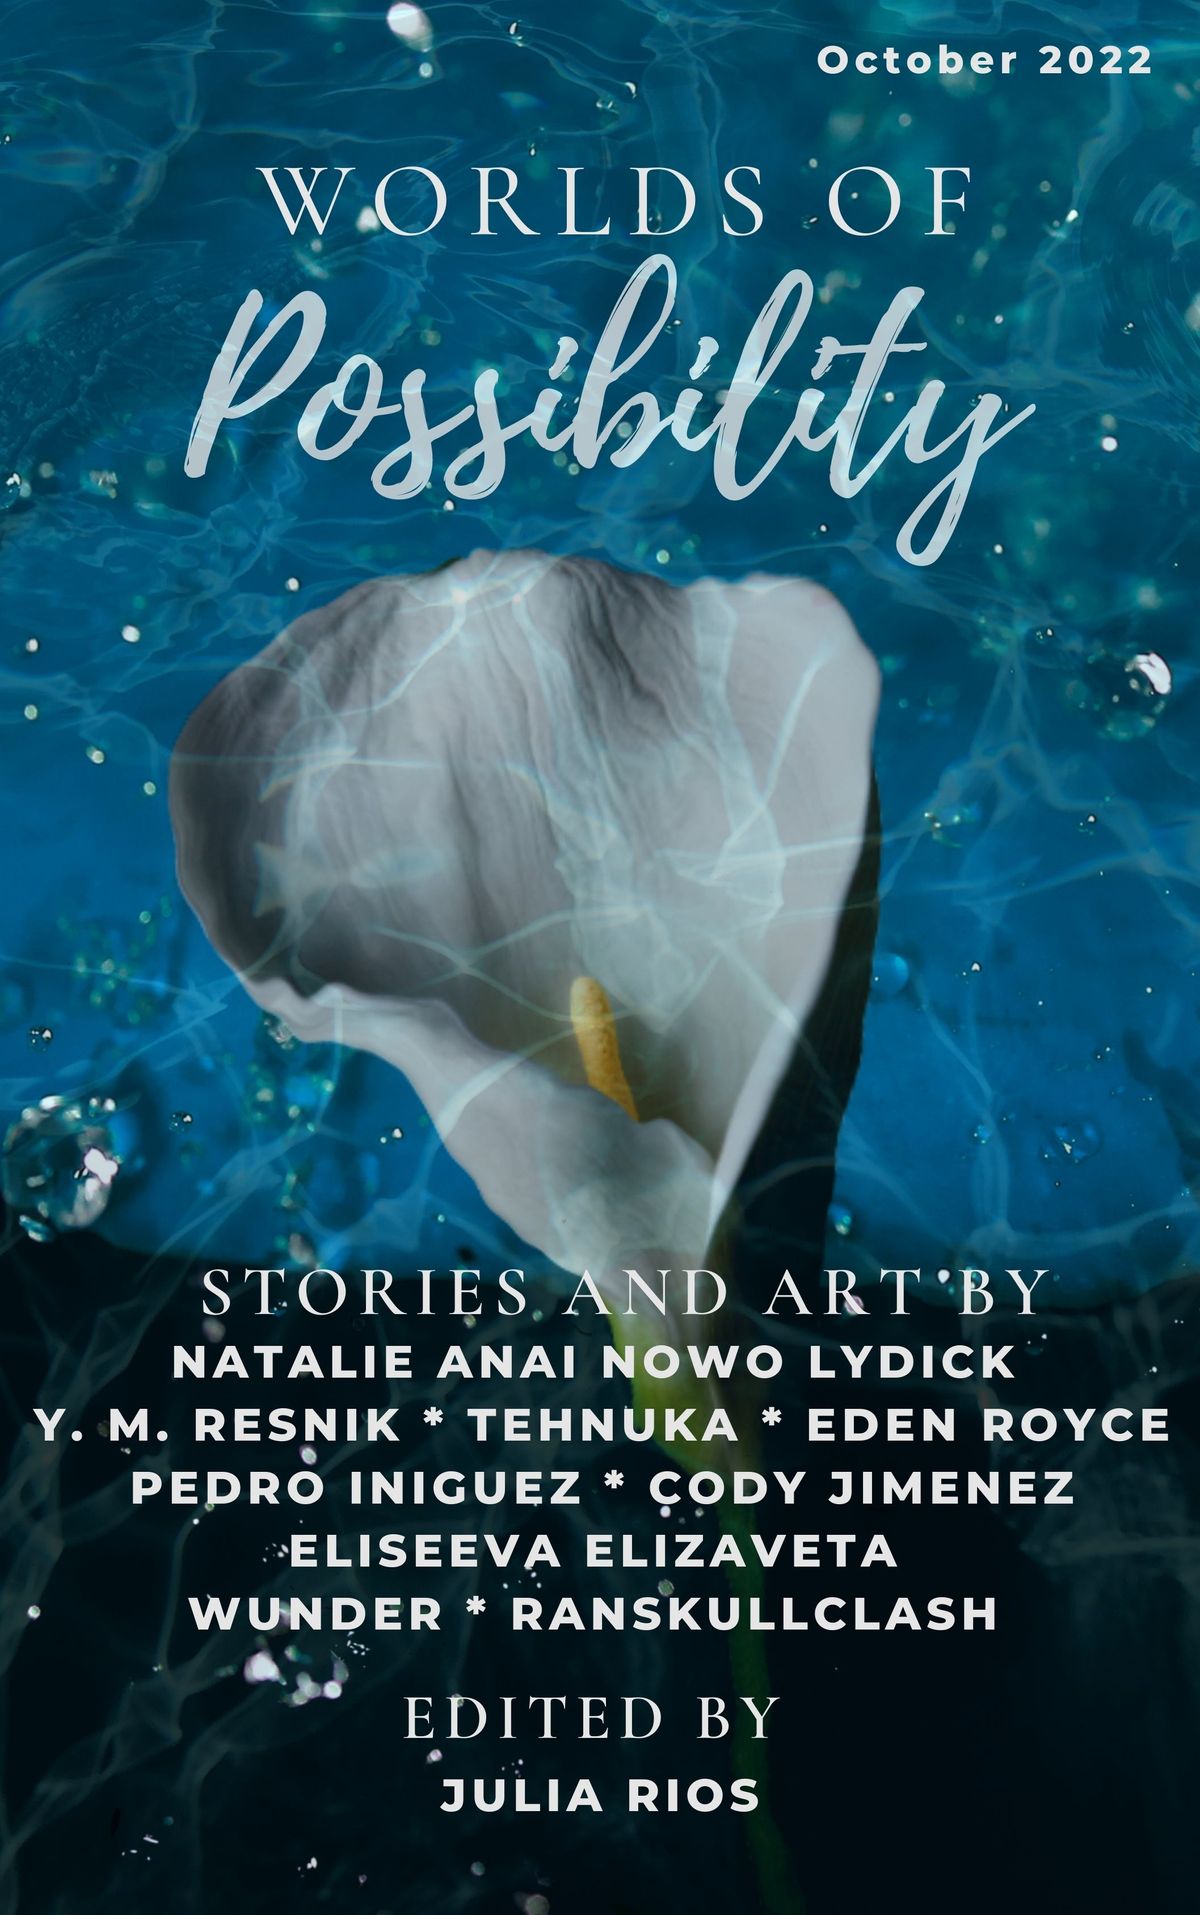 Introducing the October 2022 Issue of Worlds of Possibility